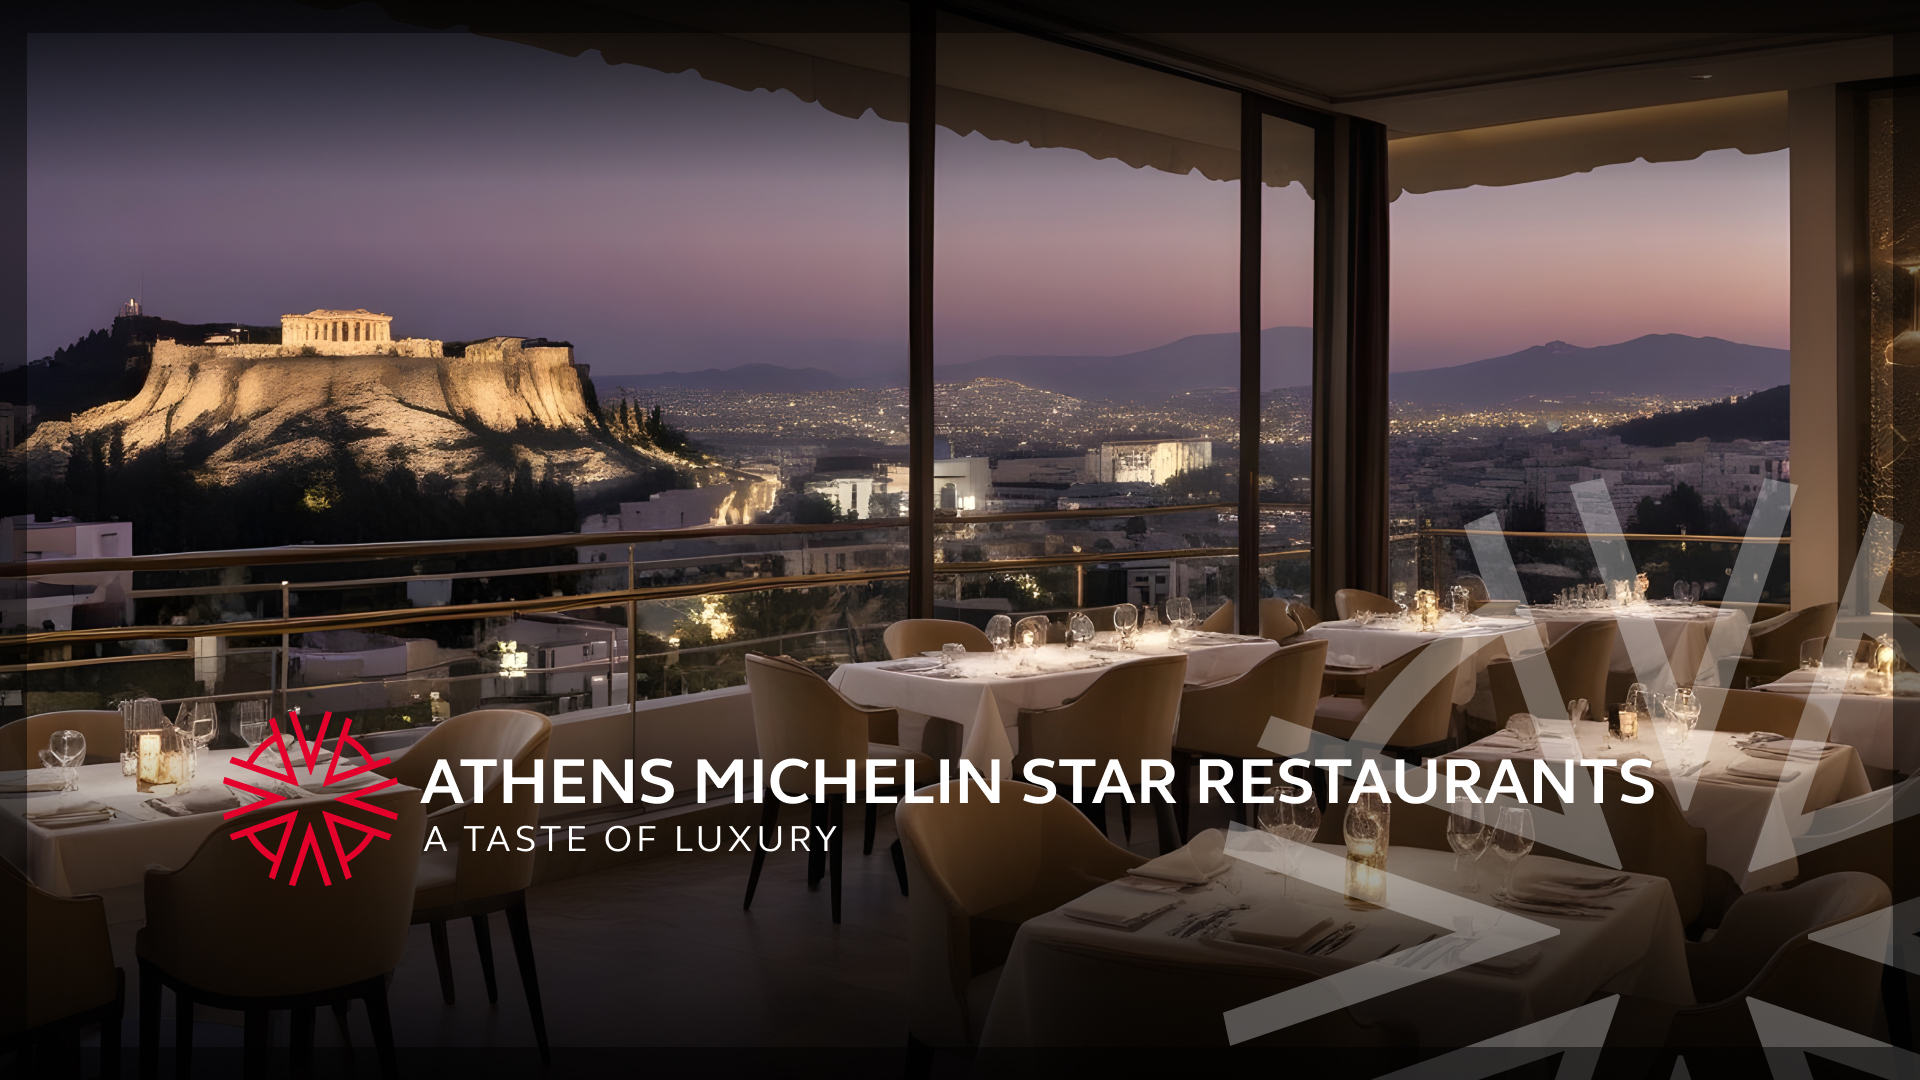 A view from the dining room of one of Athens Michelin Star restaurants with the Acropolis in the background